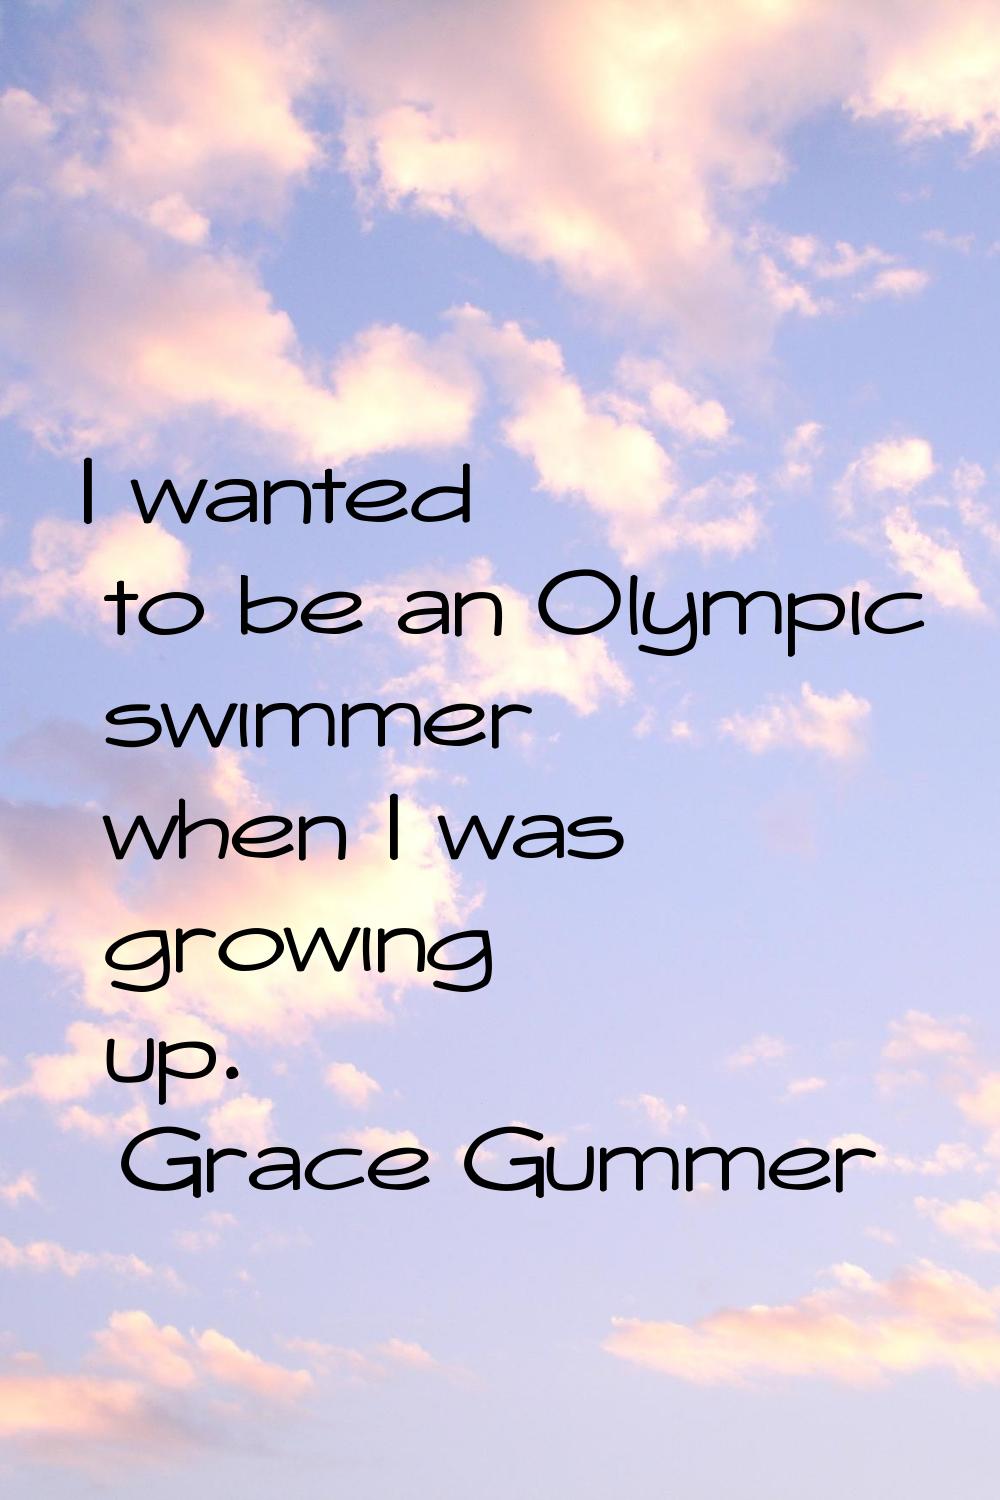 I wanted to be an Olympic swimmer when I was growing up.